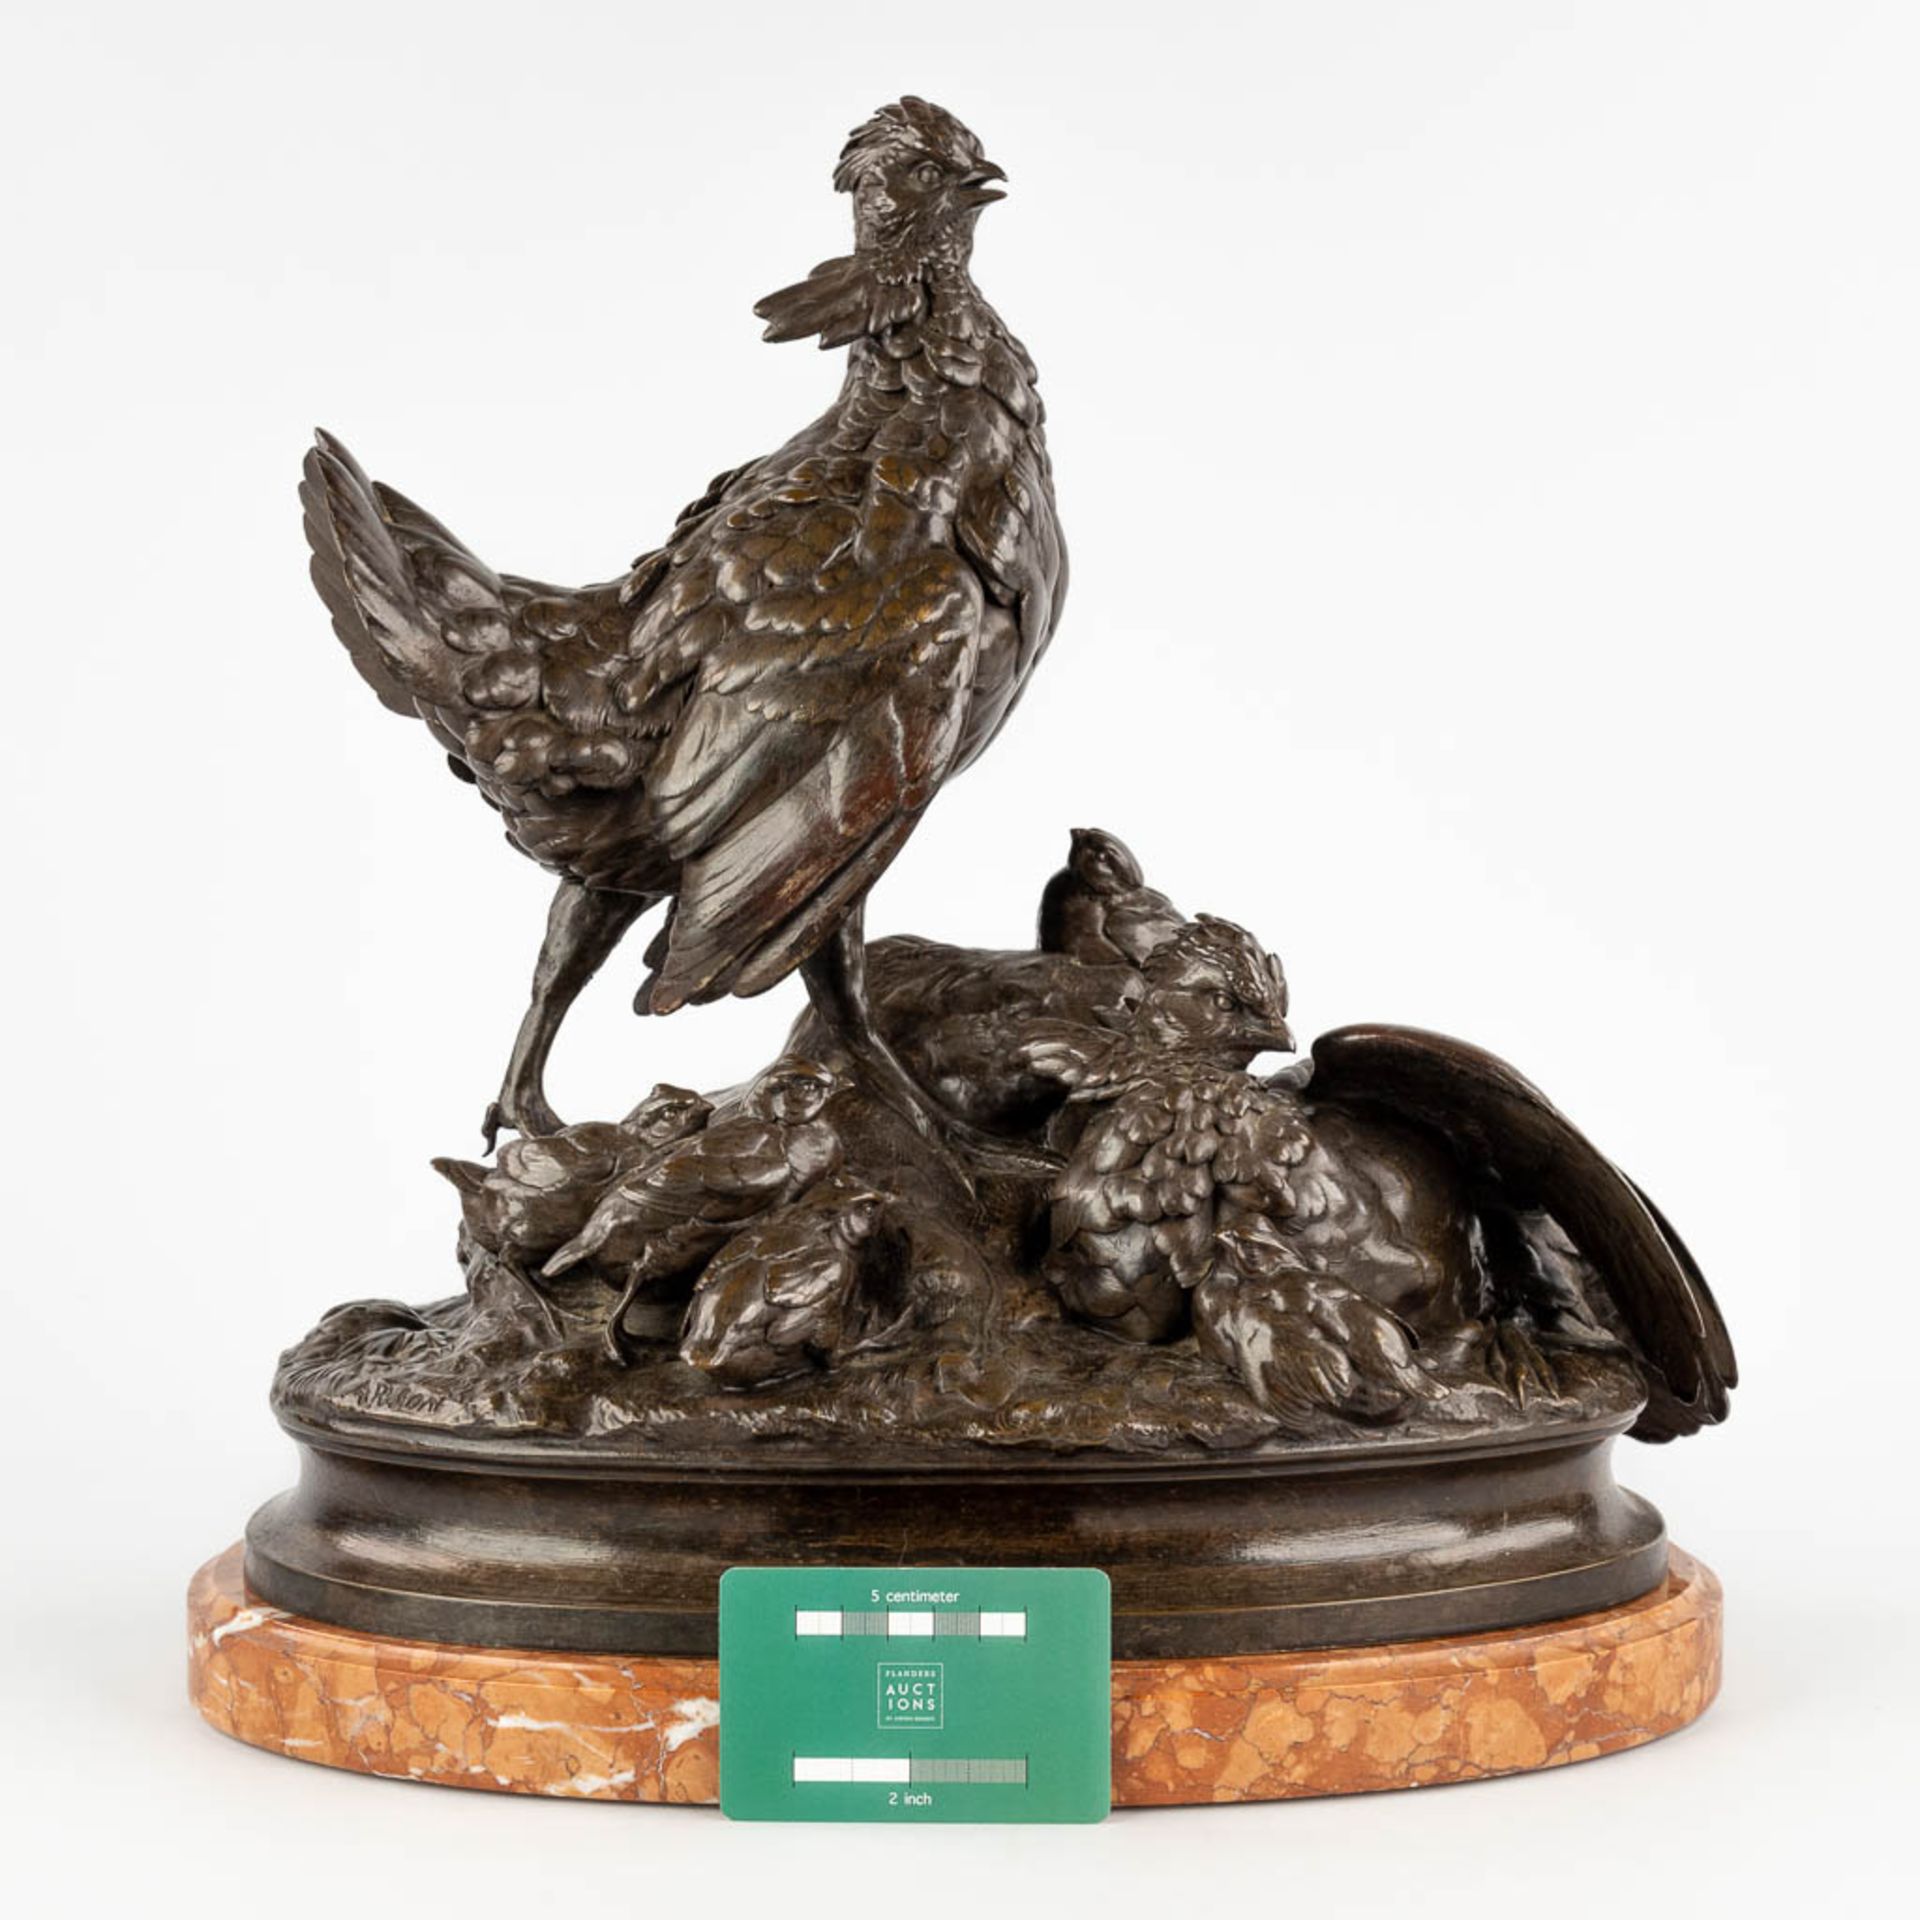 Alphonse ARSON (1822-1895) 'Partridge with chicks' patinated bronze. 1877. (D:22 x W:40 x H:41 cm) - Image 2 of 14